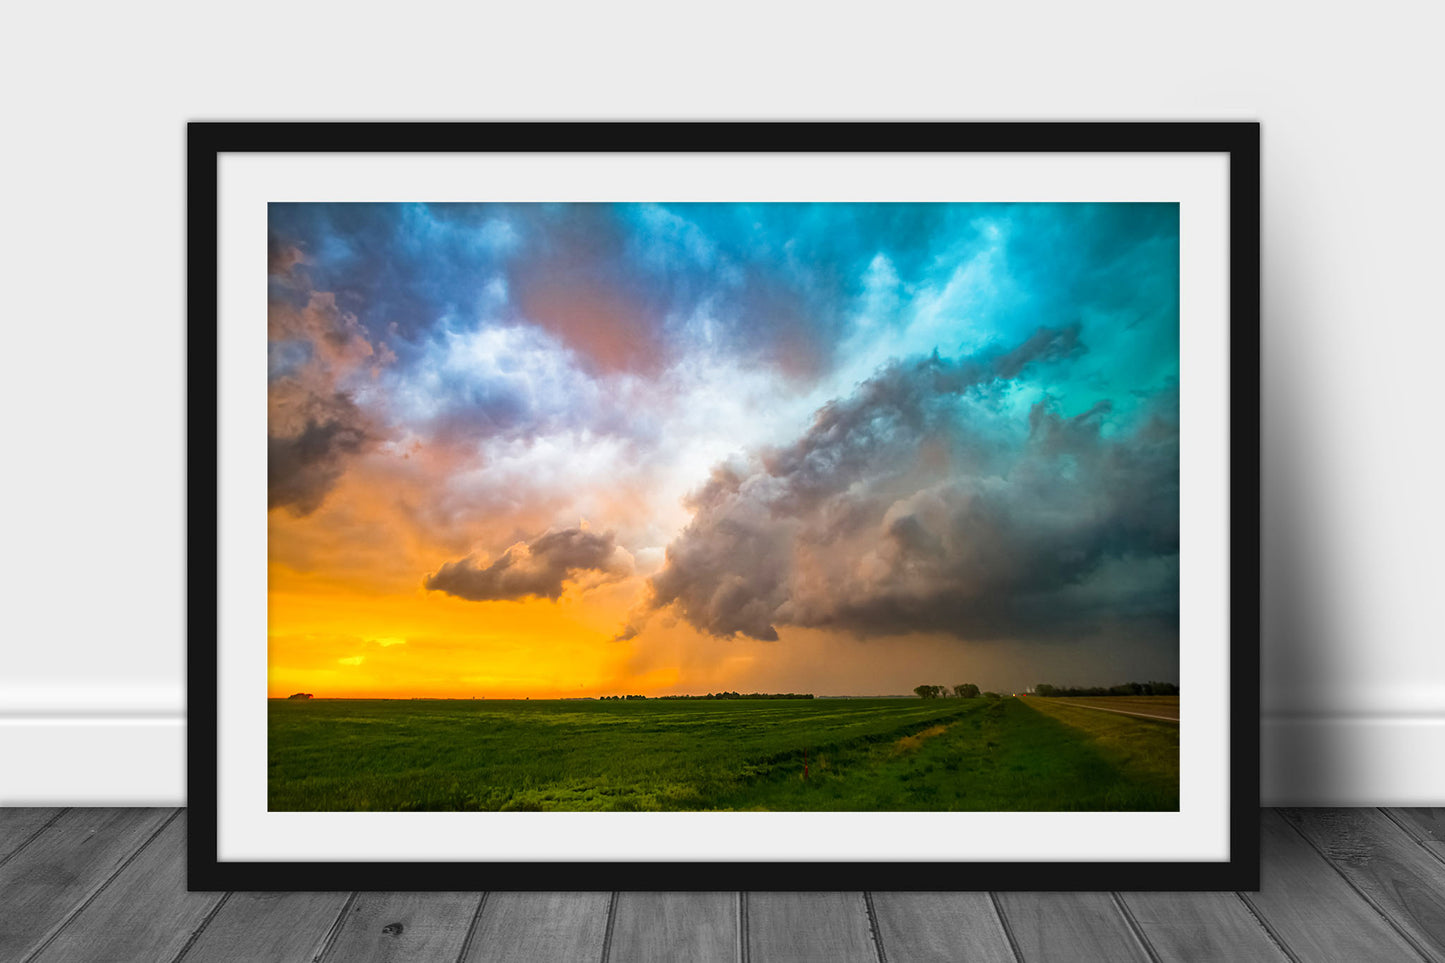 Framed and matted thunderstorm photography print of colorful storm clouds at sunset on a spring evening in Kansas by Sean Ramsey of Southern Plains Photography.